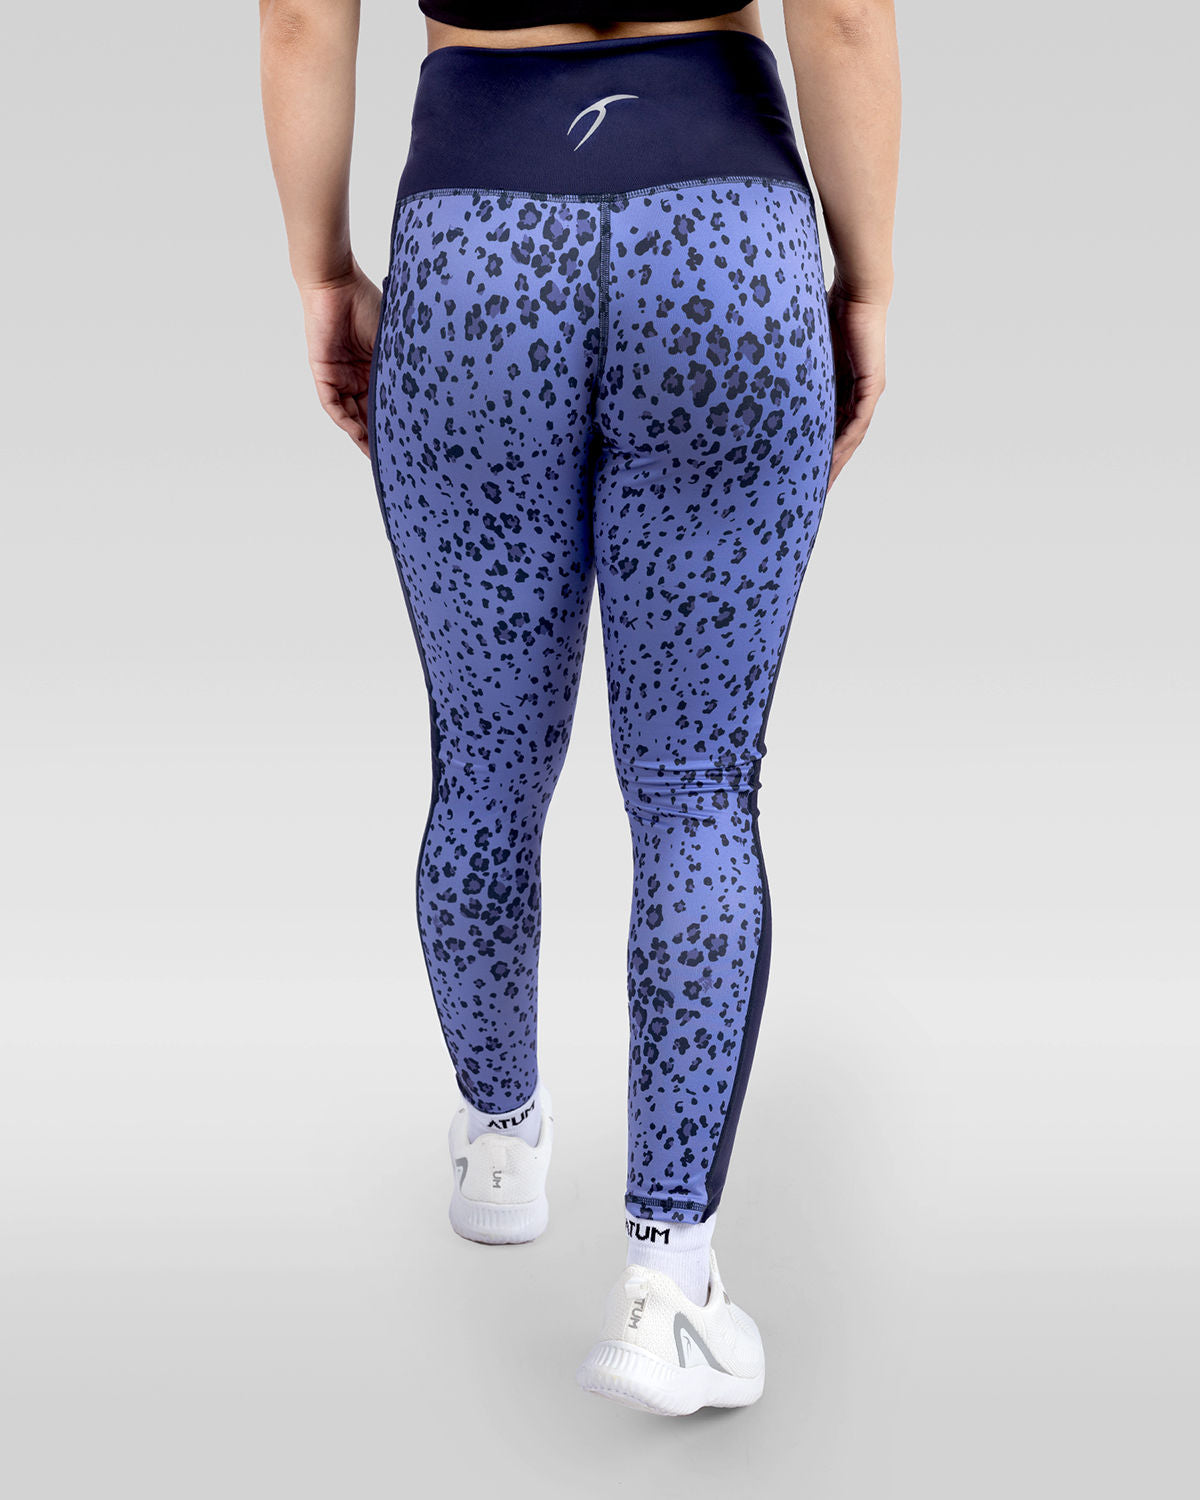 Photo by 𝗔𝗧𝗨𝗠 SPORTSWEAR ® on December 20, 2022. May be an image of 1 woman wears printed purple/navy floral leggings, and white shoes.